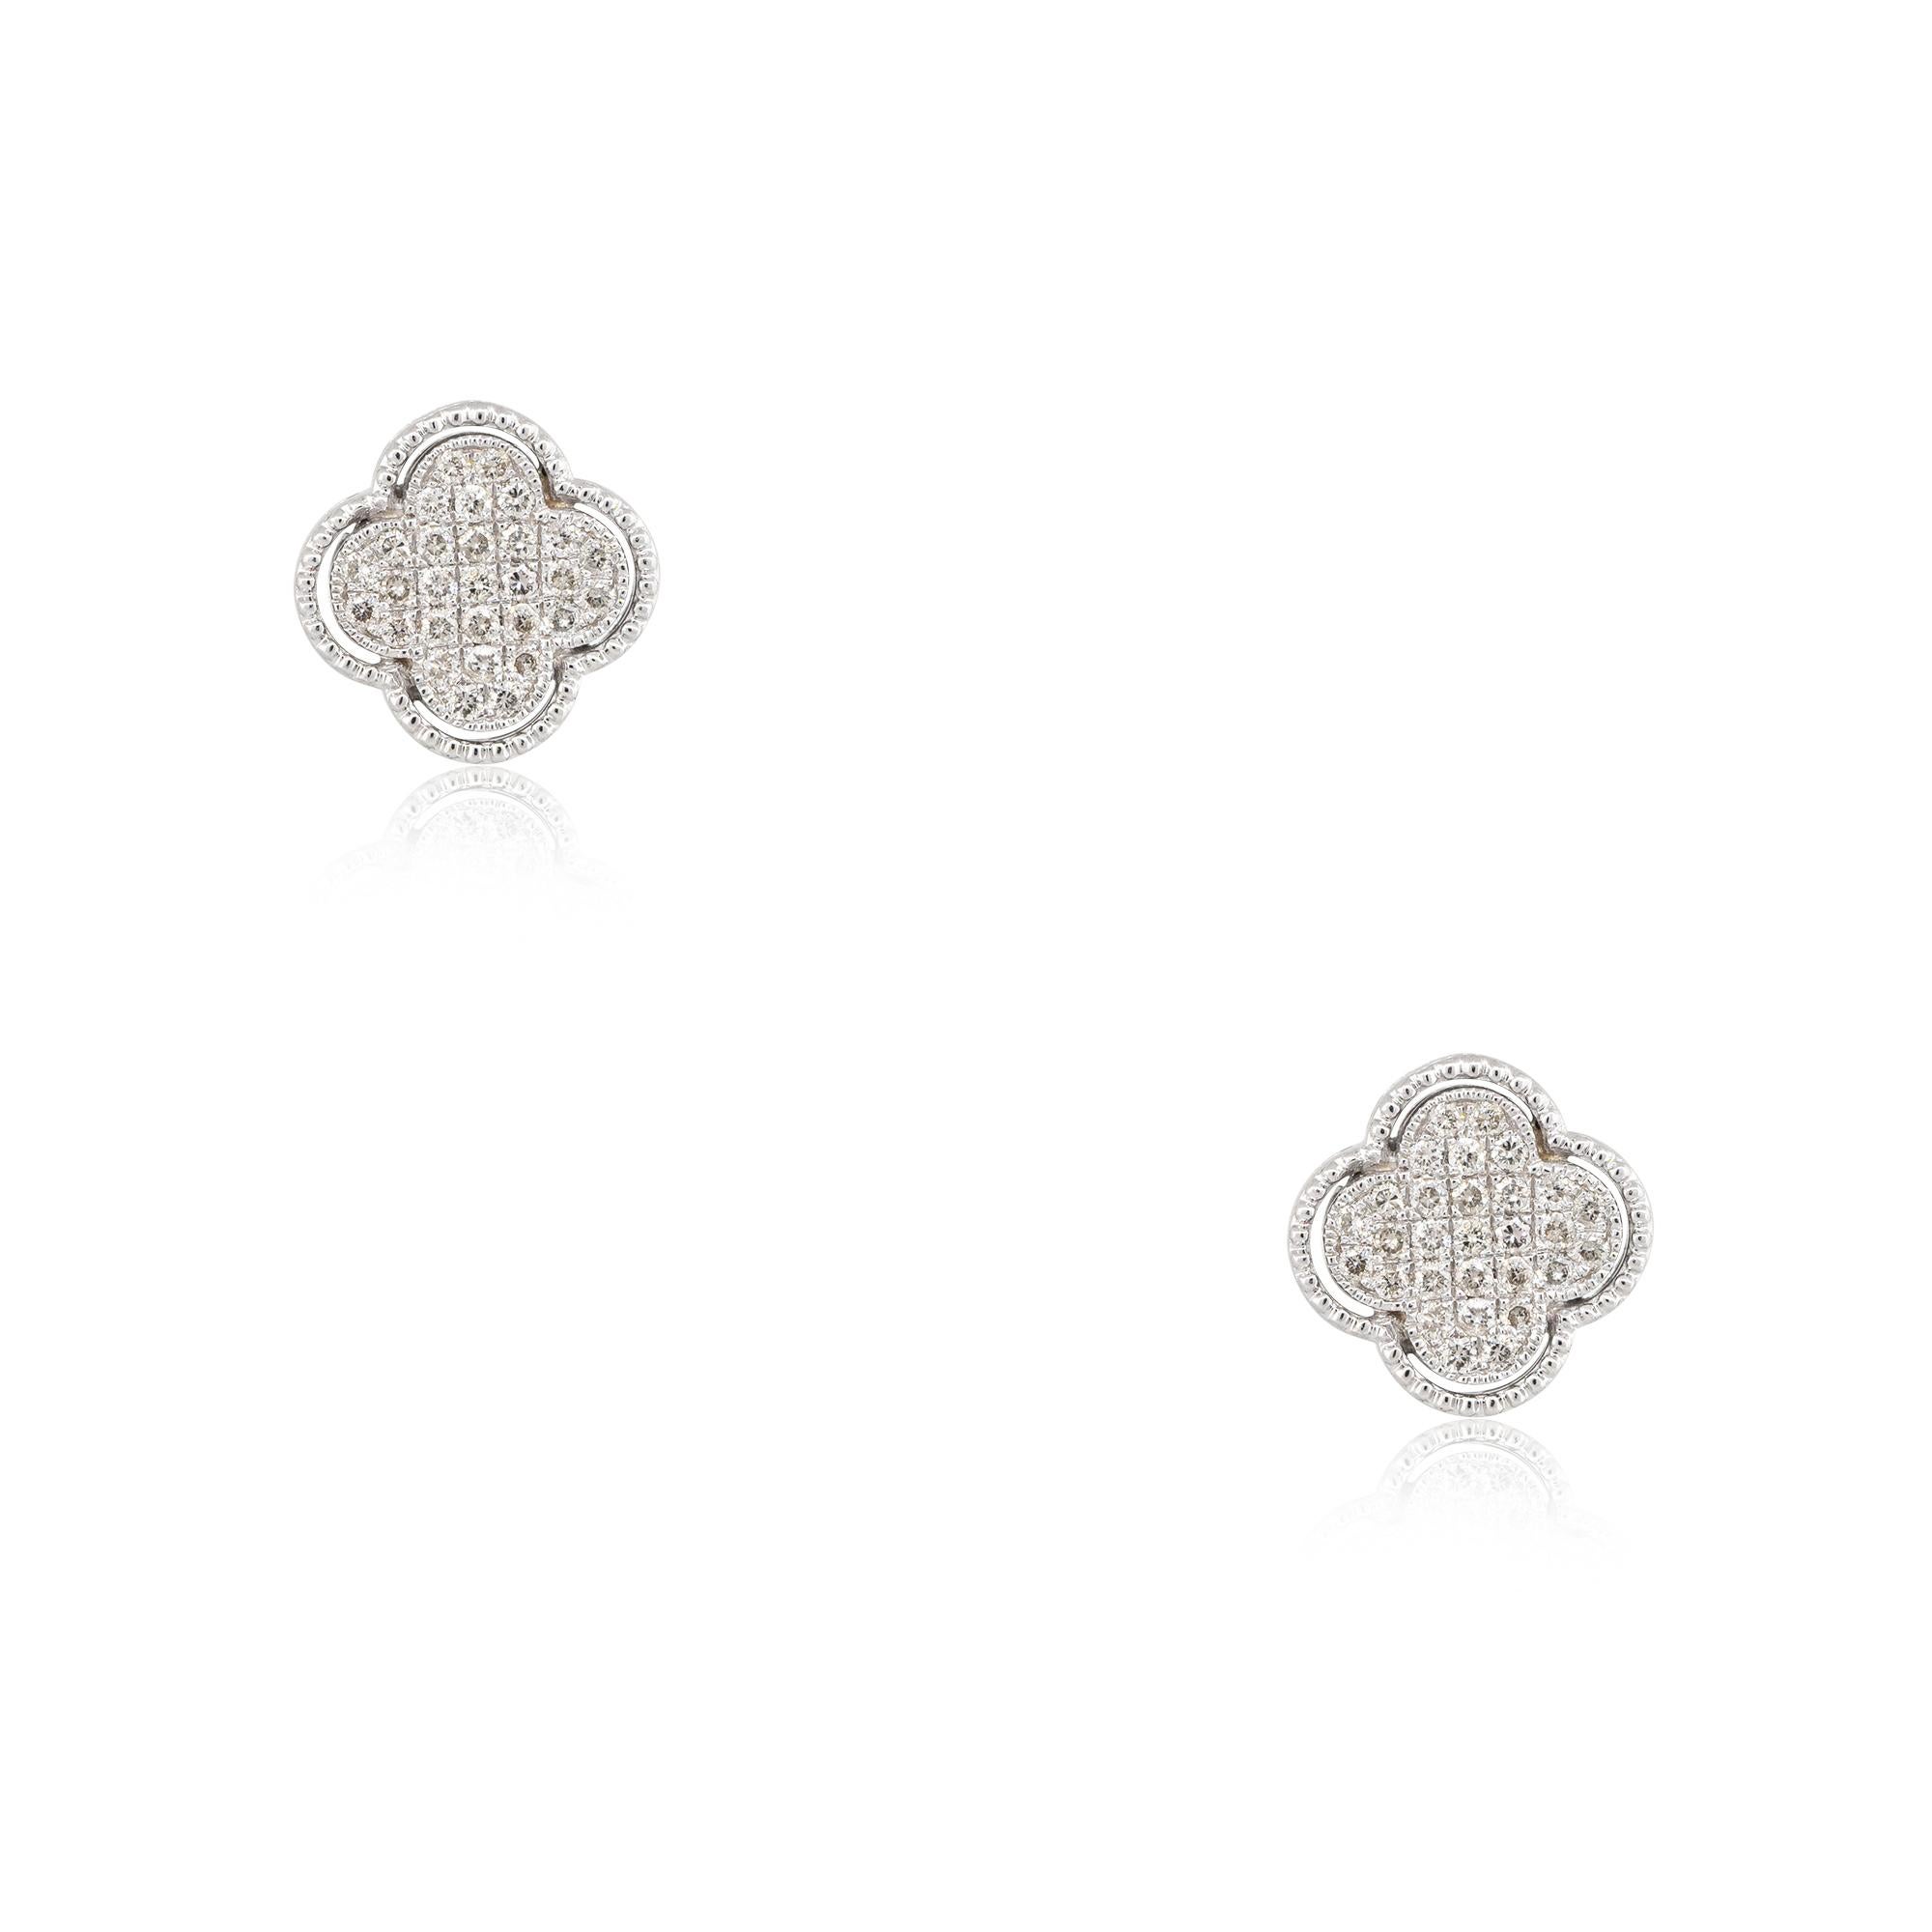 14k White Gold 0.51ctw Pave Diamond Clover Stud Earrings
Material: 14k White Gold
Diamond Details: Approximately 0.51ctw of Pave set, Round Brilliant Diamonds. All diamonds are approximately G/H in color and approximately VS/SI in clarity
Earring